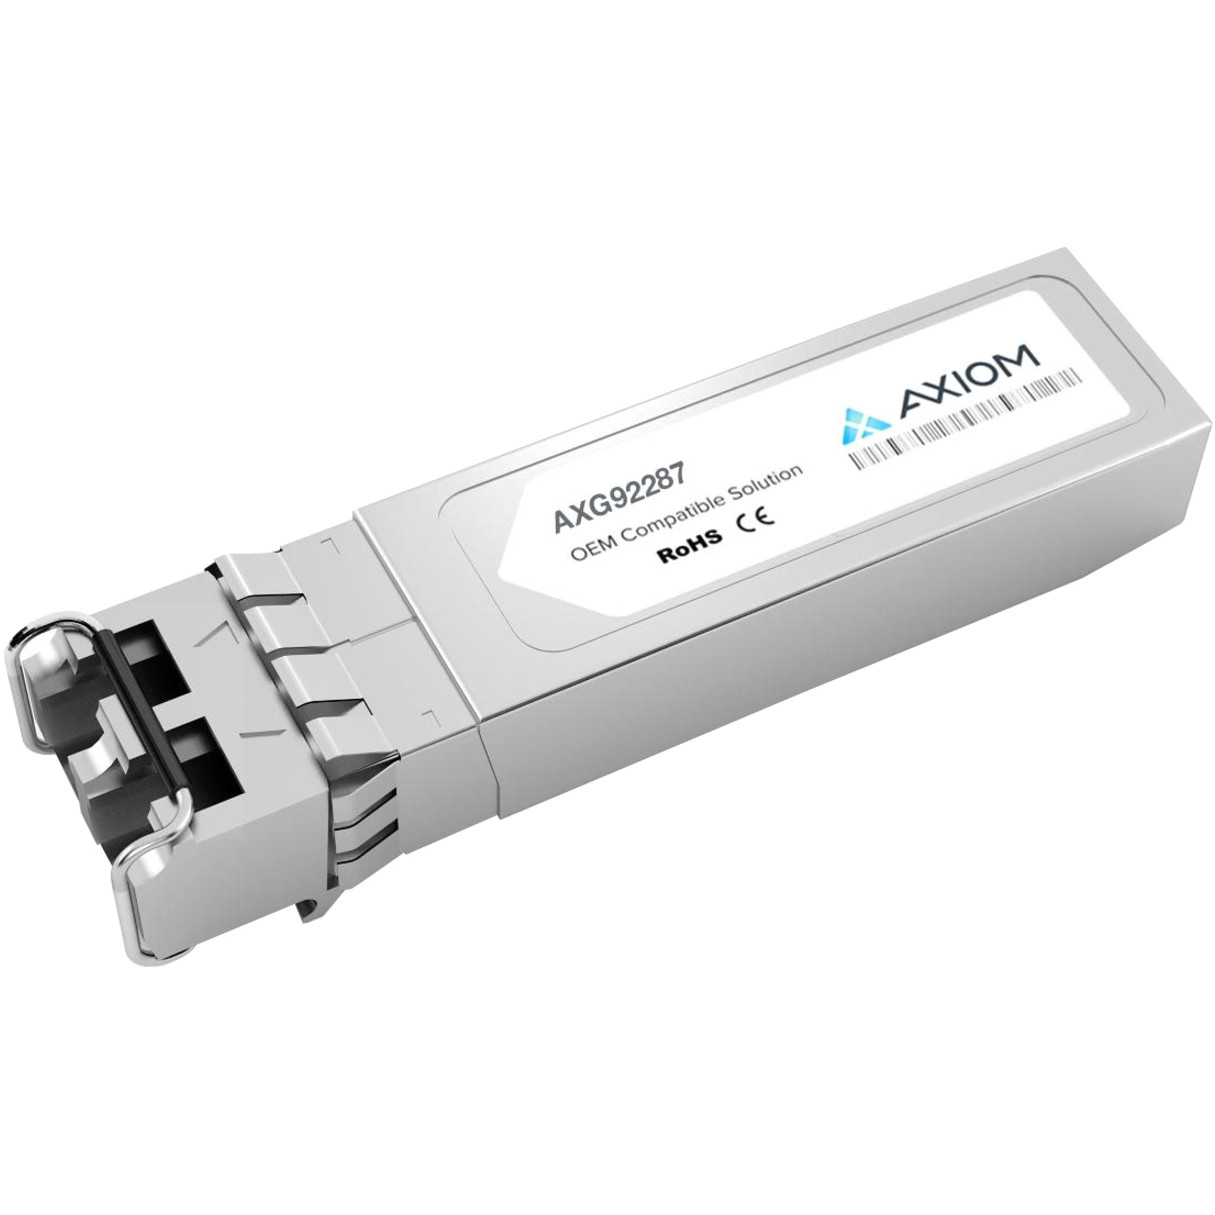 Axiom Memory Solutions 10GBASE-LR SFP+ Transceiver for CiscoSFP-10G-LRTAA CompliantFor Data Networking1 x 10GBase-LR1.25 GB/s 10 Gigabit Ethernet10 Gbi… AXG92287